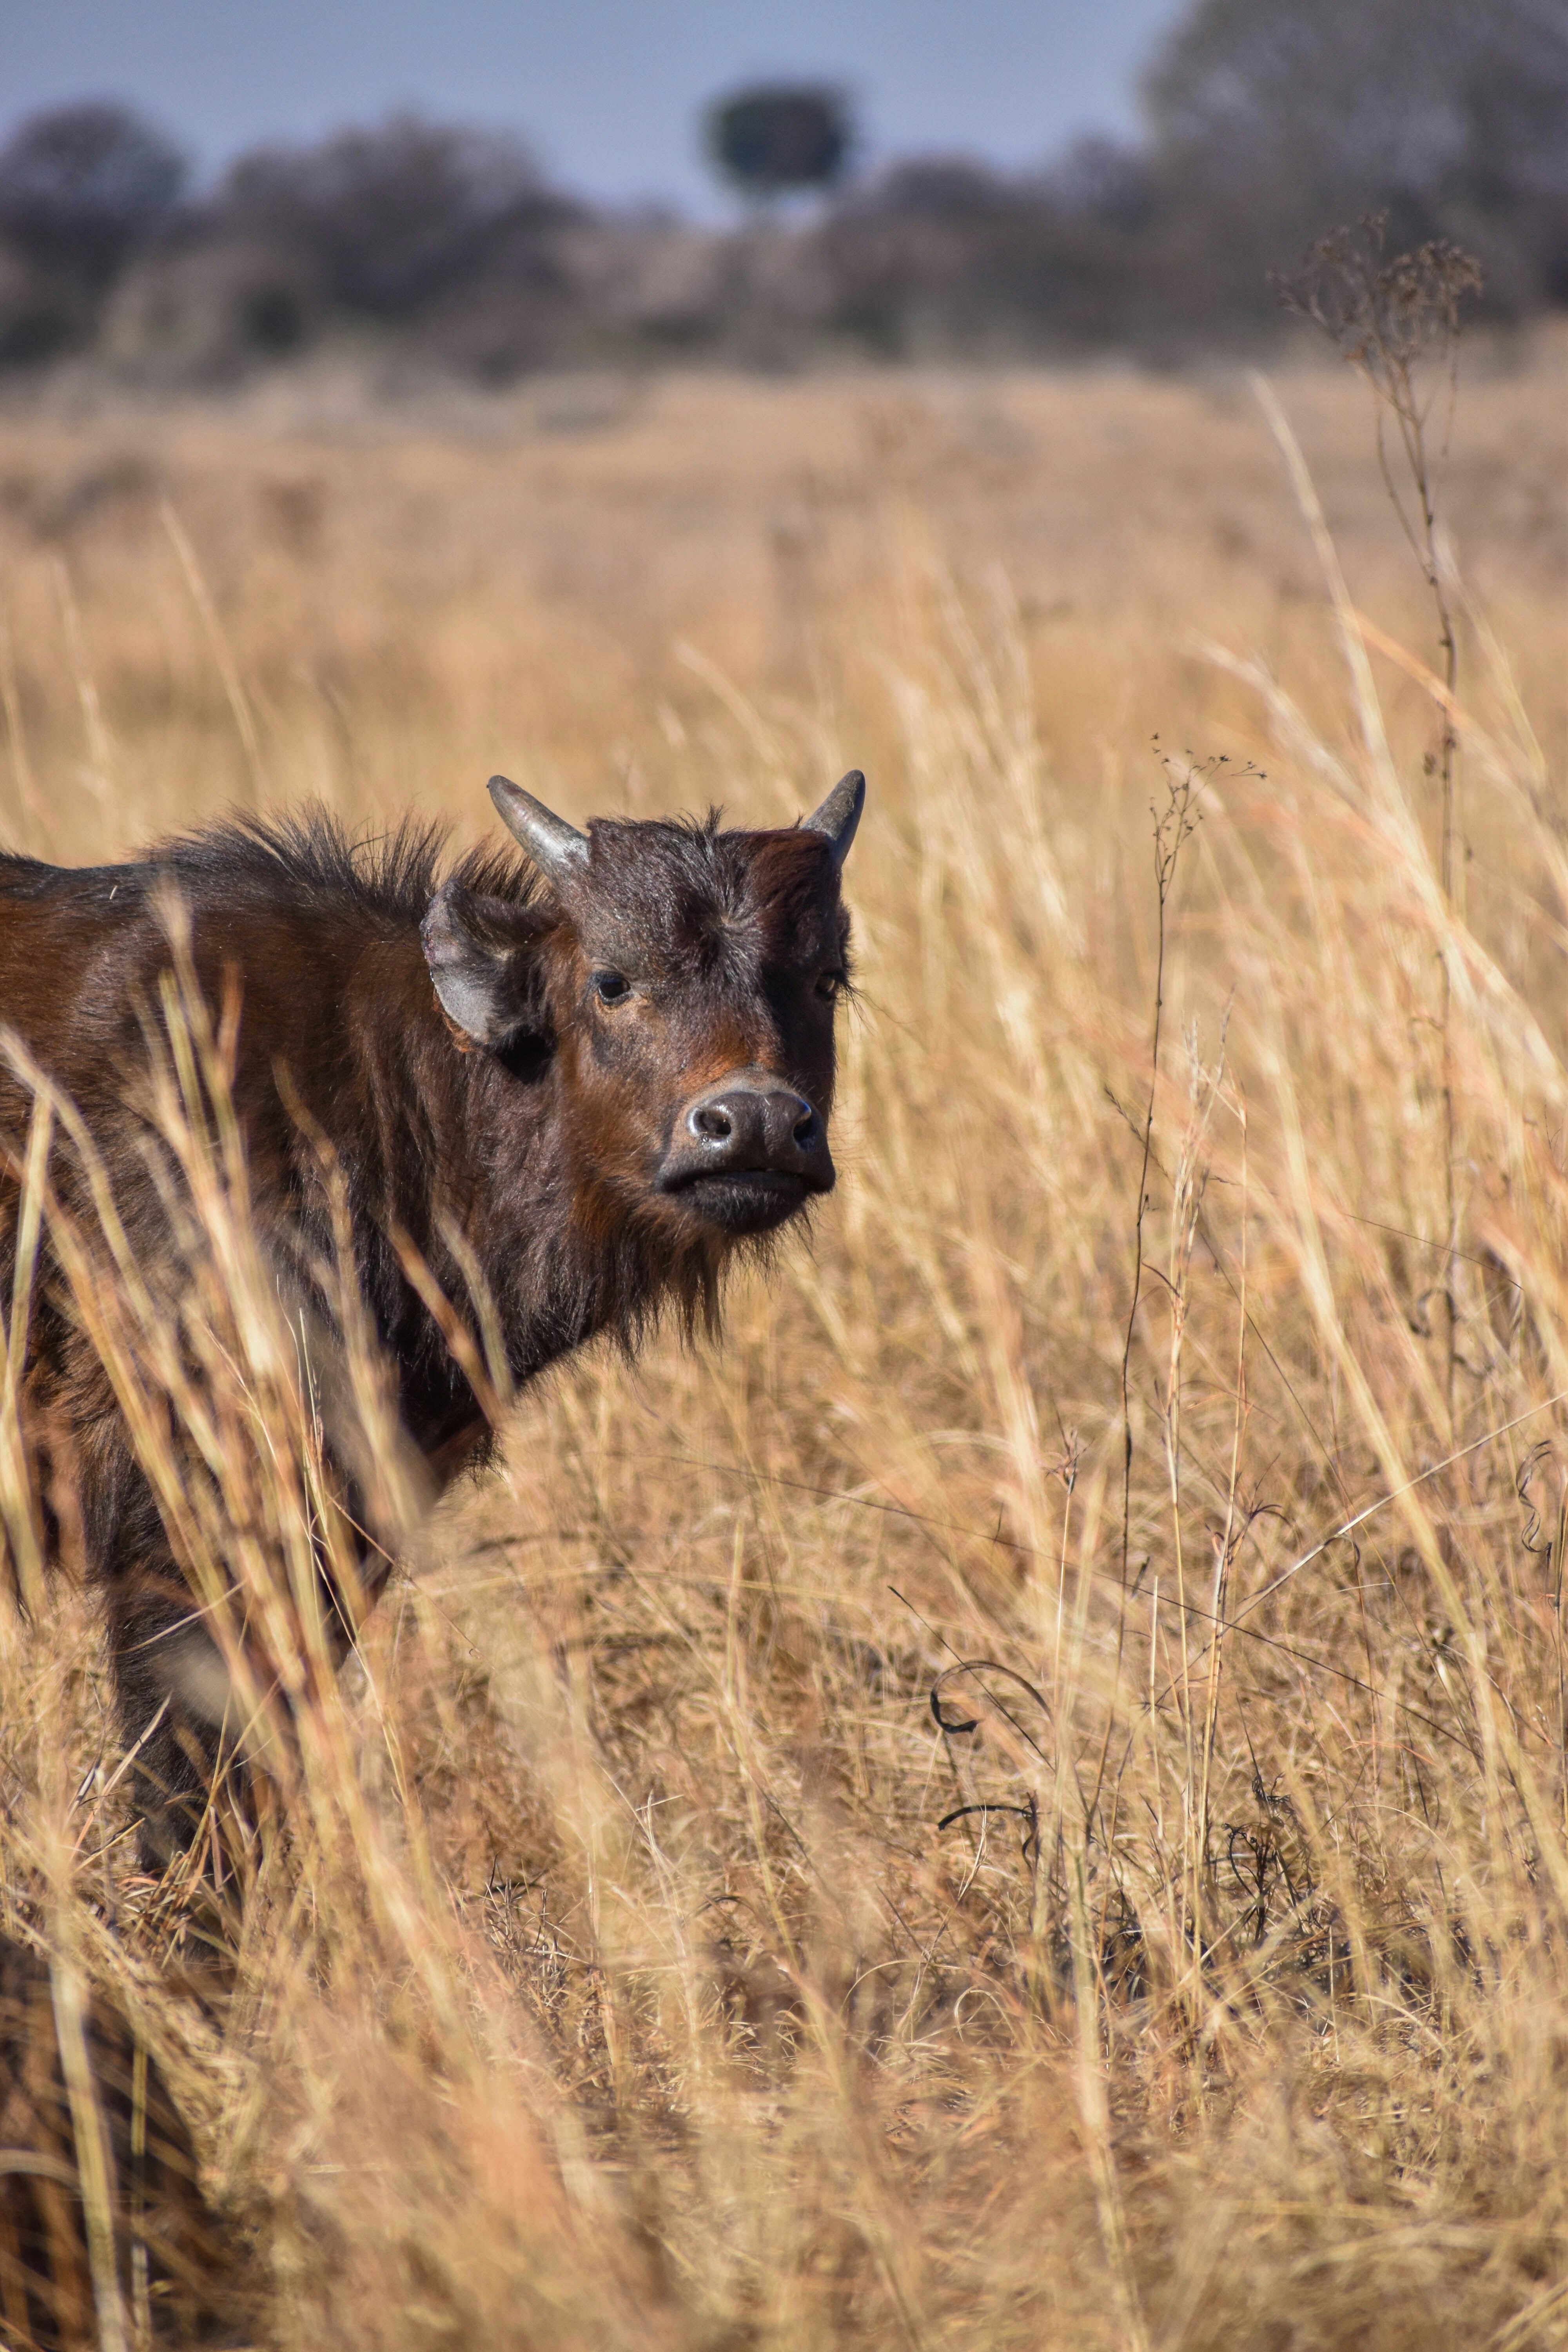 Baby Buffalo in South Africa.